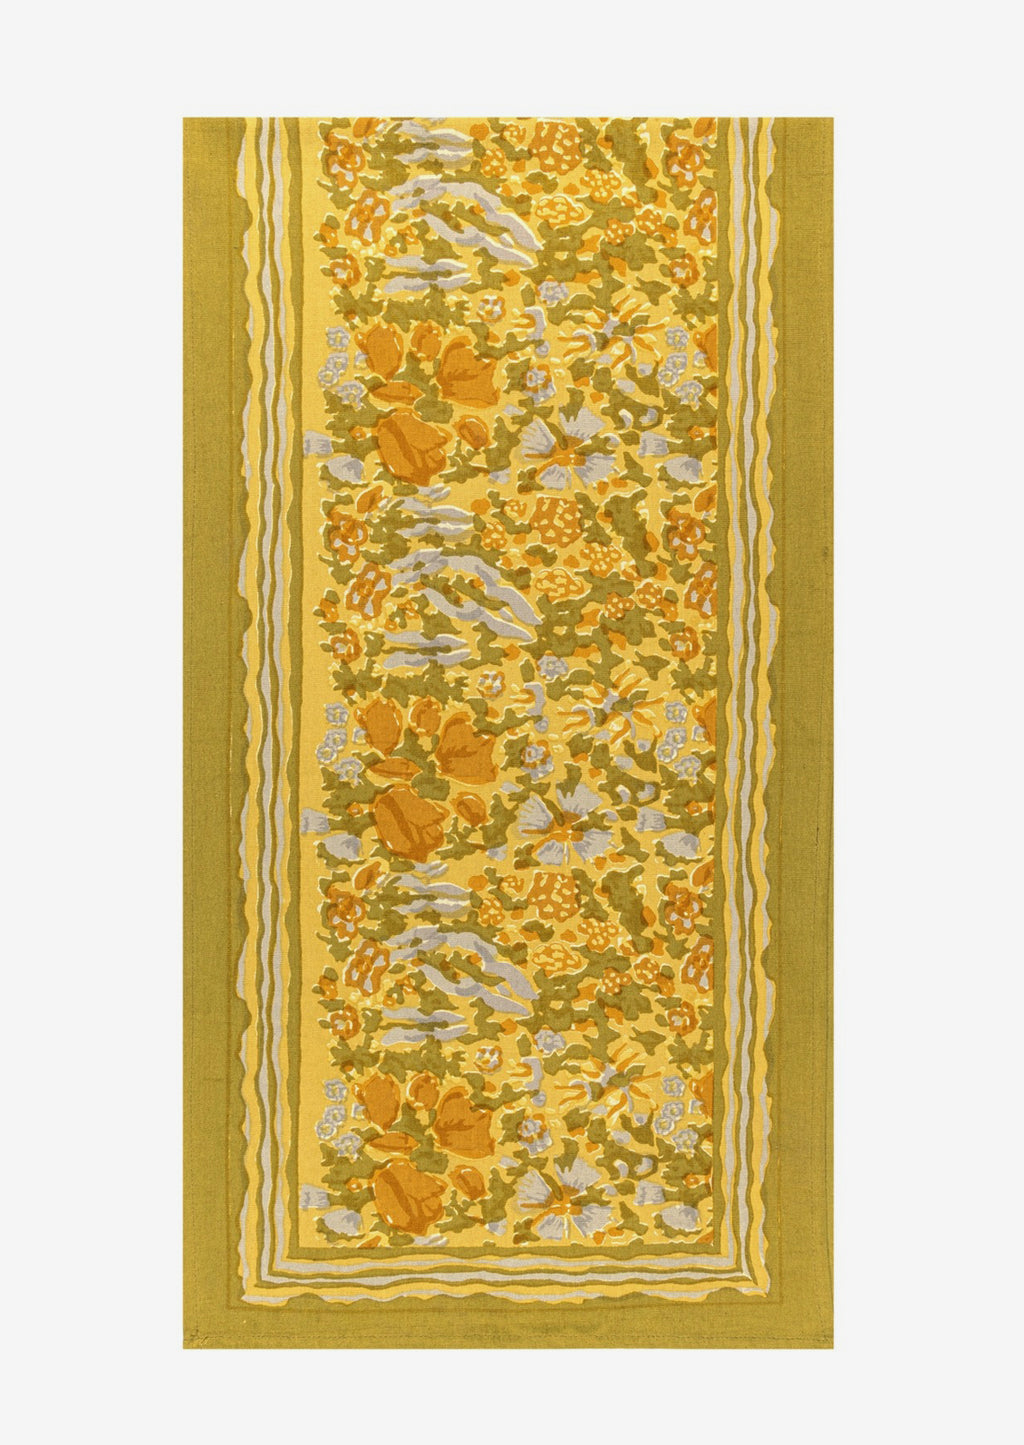 1: A mustard floral print table runner.